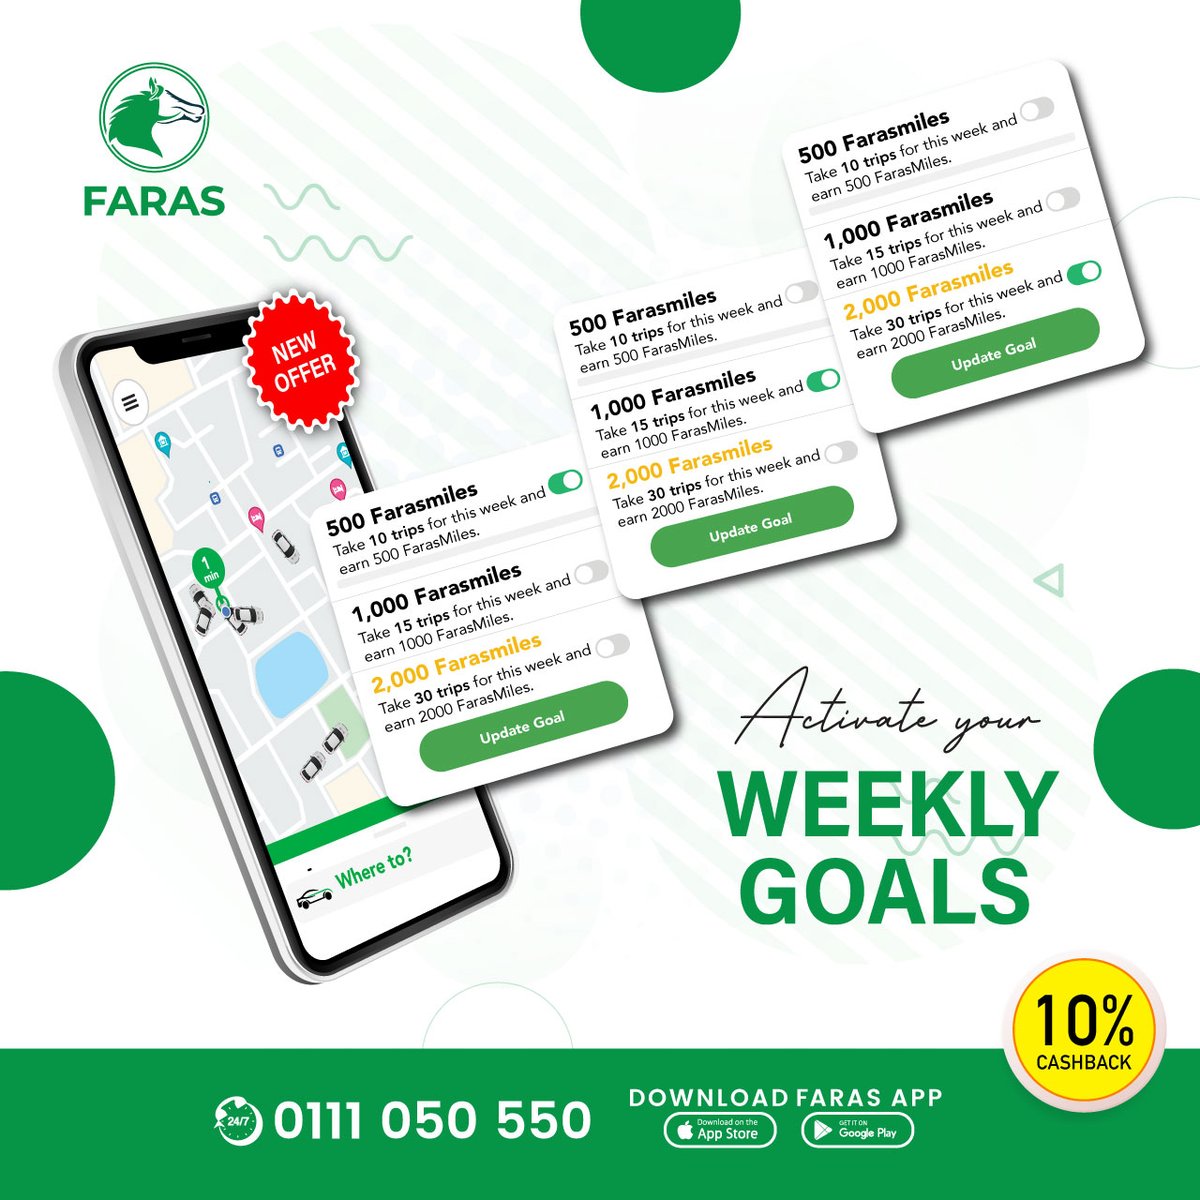 Remember that your weekly goals just got easier to reach with Faras Cabs. Affordable fares, professional drivers, and a hassle-free experience await you

#FarasLoyaltyAwards